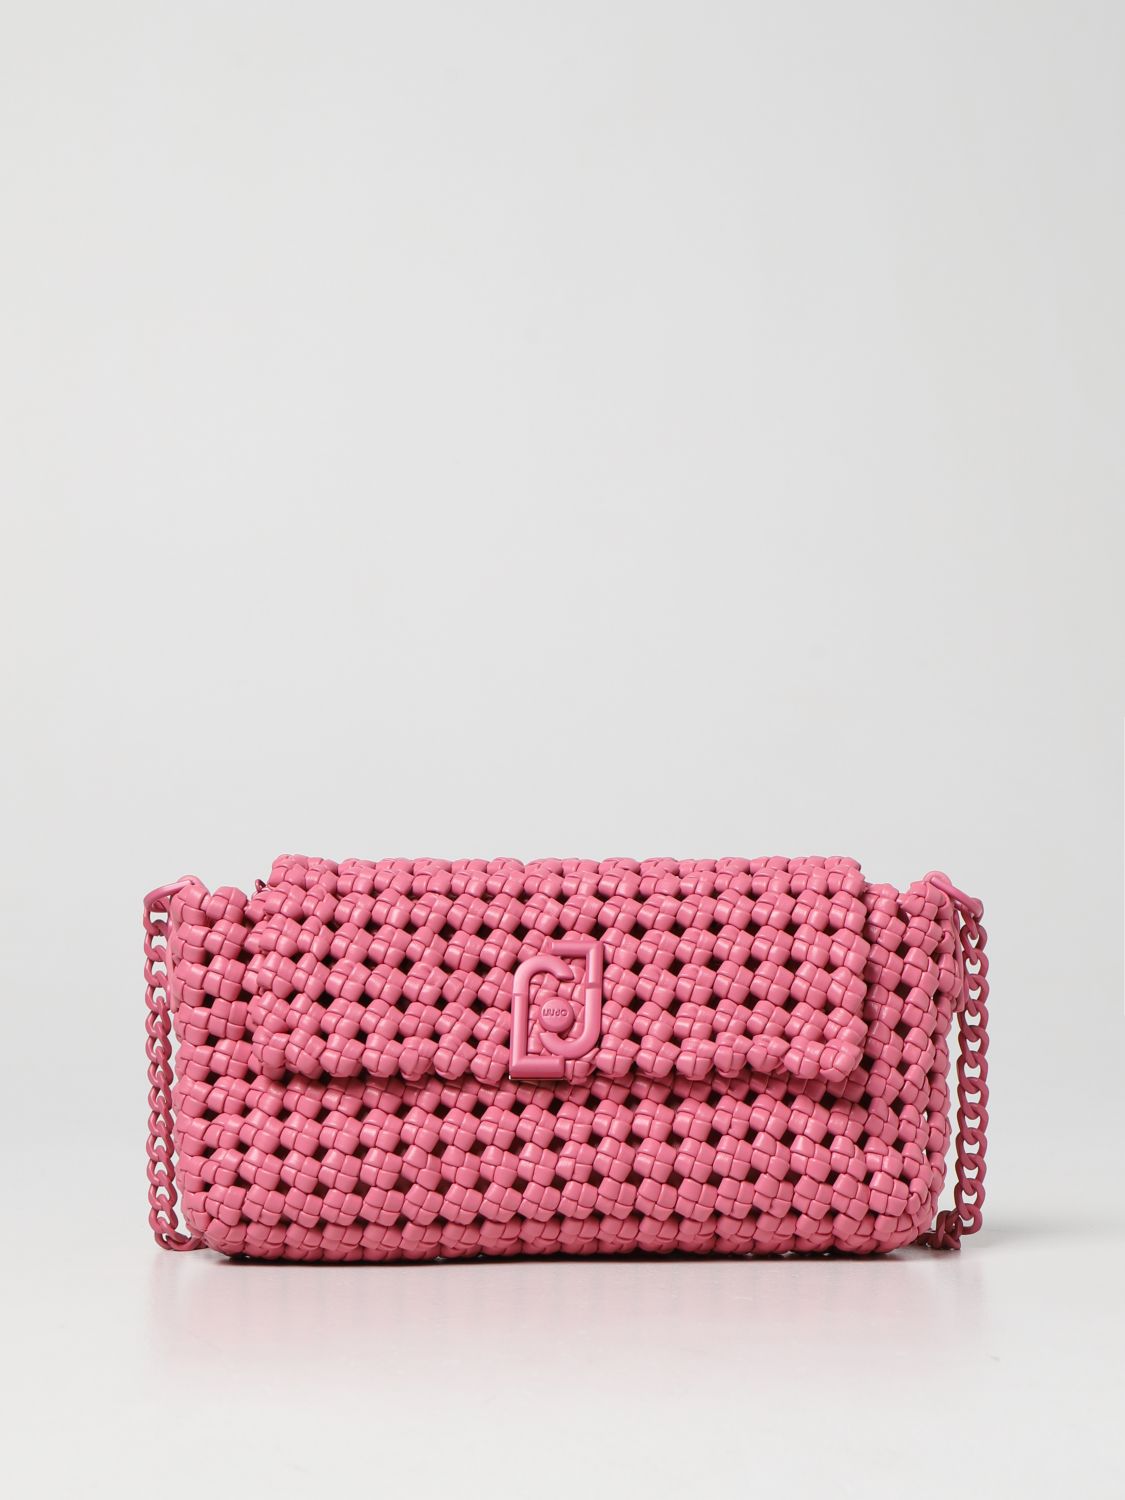 Liu •jo Bag In Woven Synthetic Leather In Pink